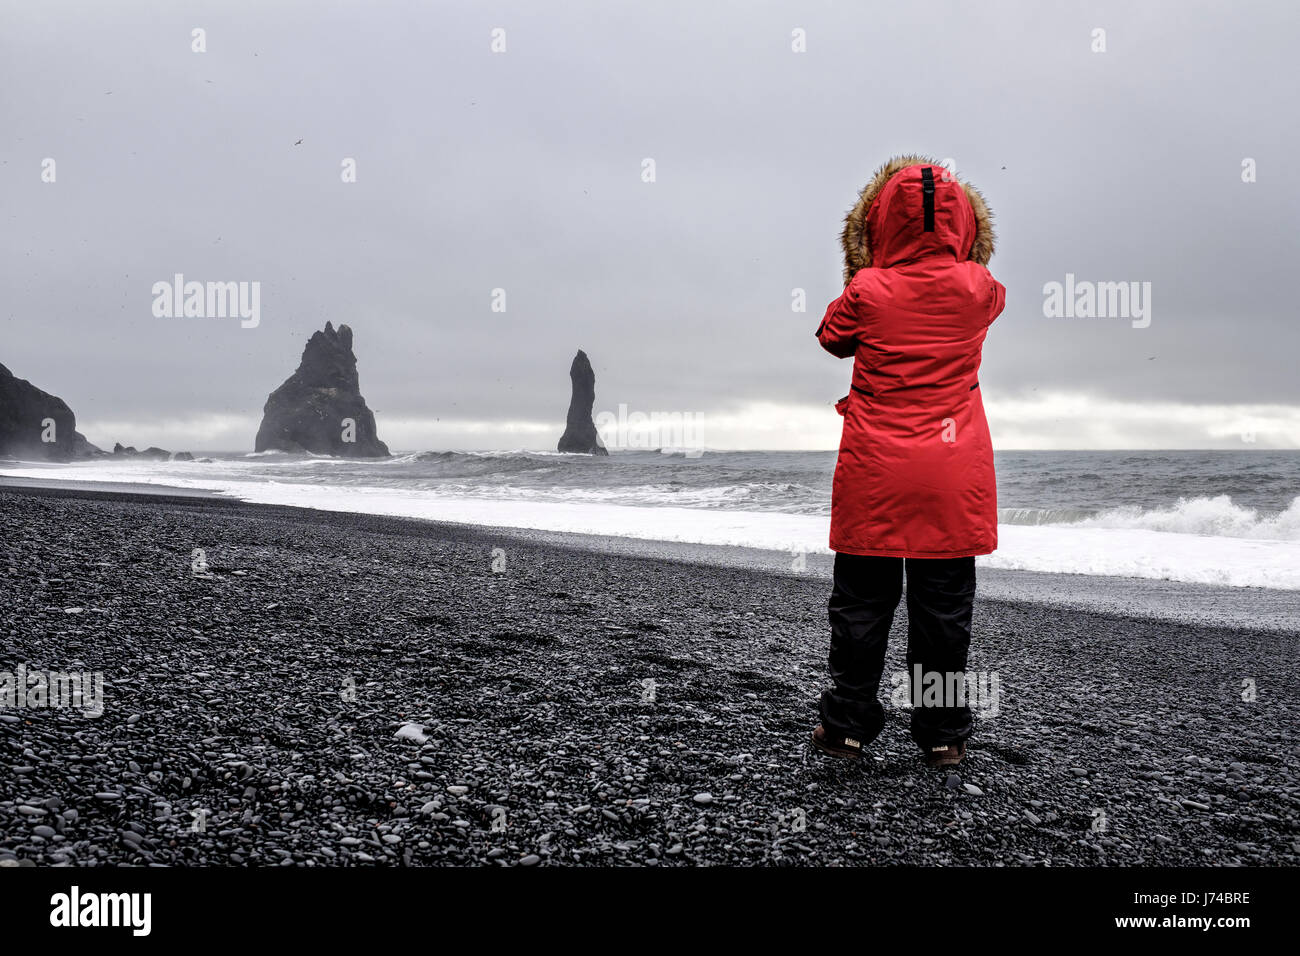 Woman with a red coat taking a photograph on a beach in a cloudy winter day. Stock Photo